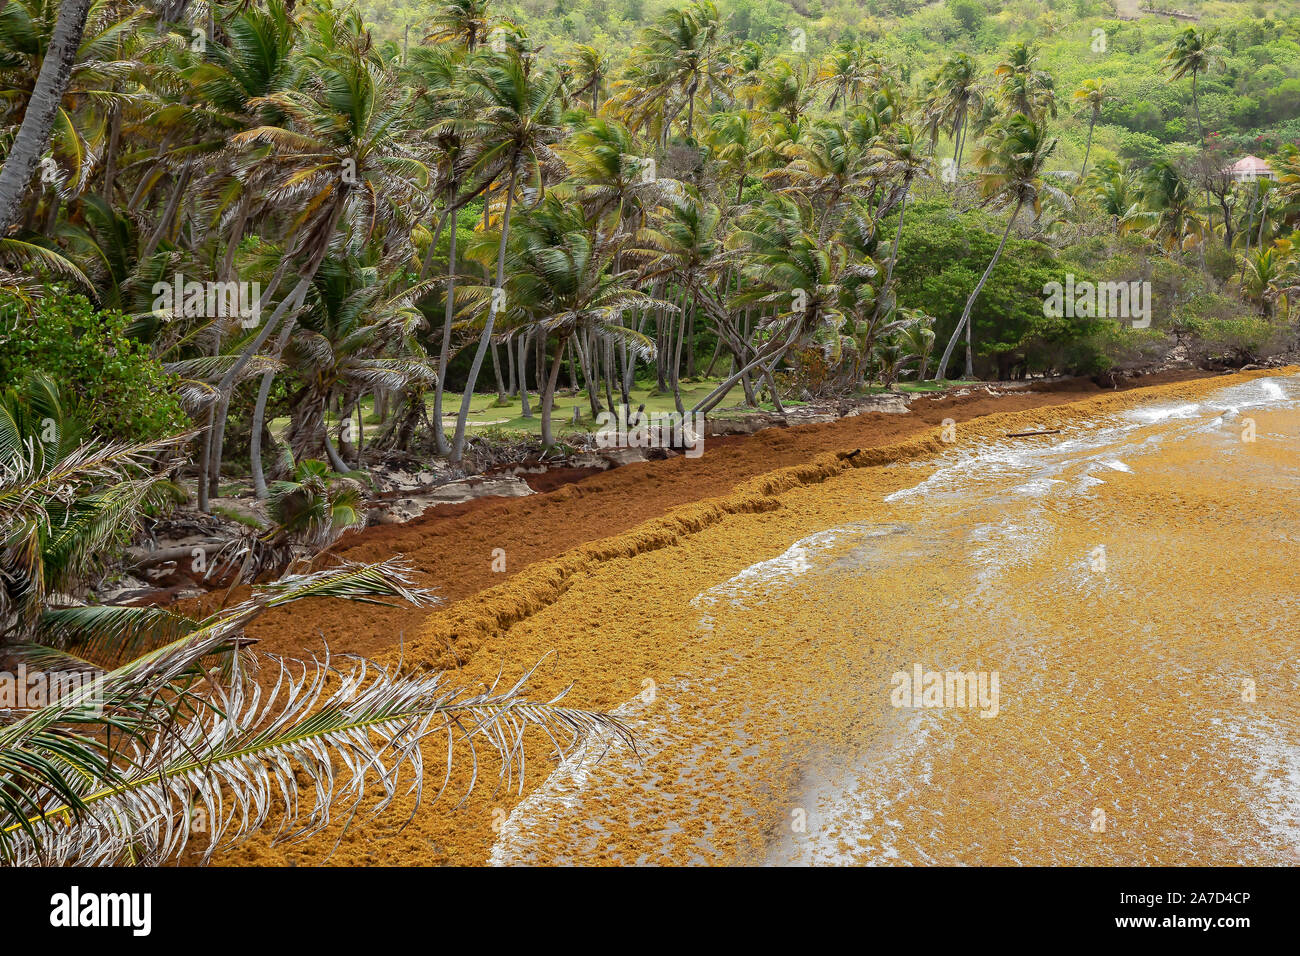 Sargassum seaweed covering a bay in Bequia island, St. Vincent and the Grenadines Stock Photo